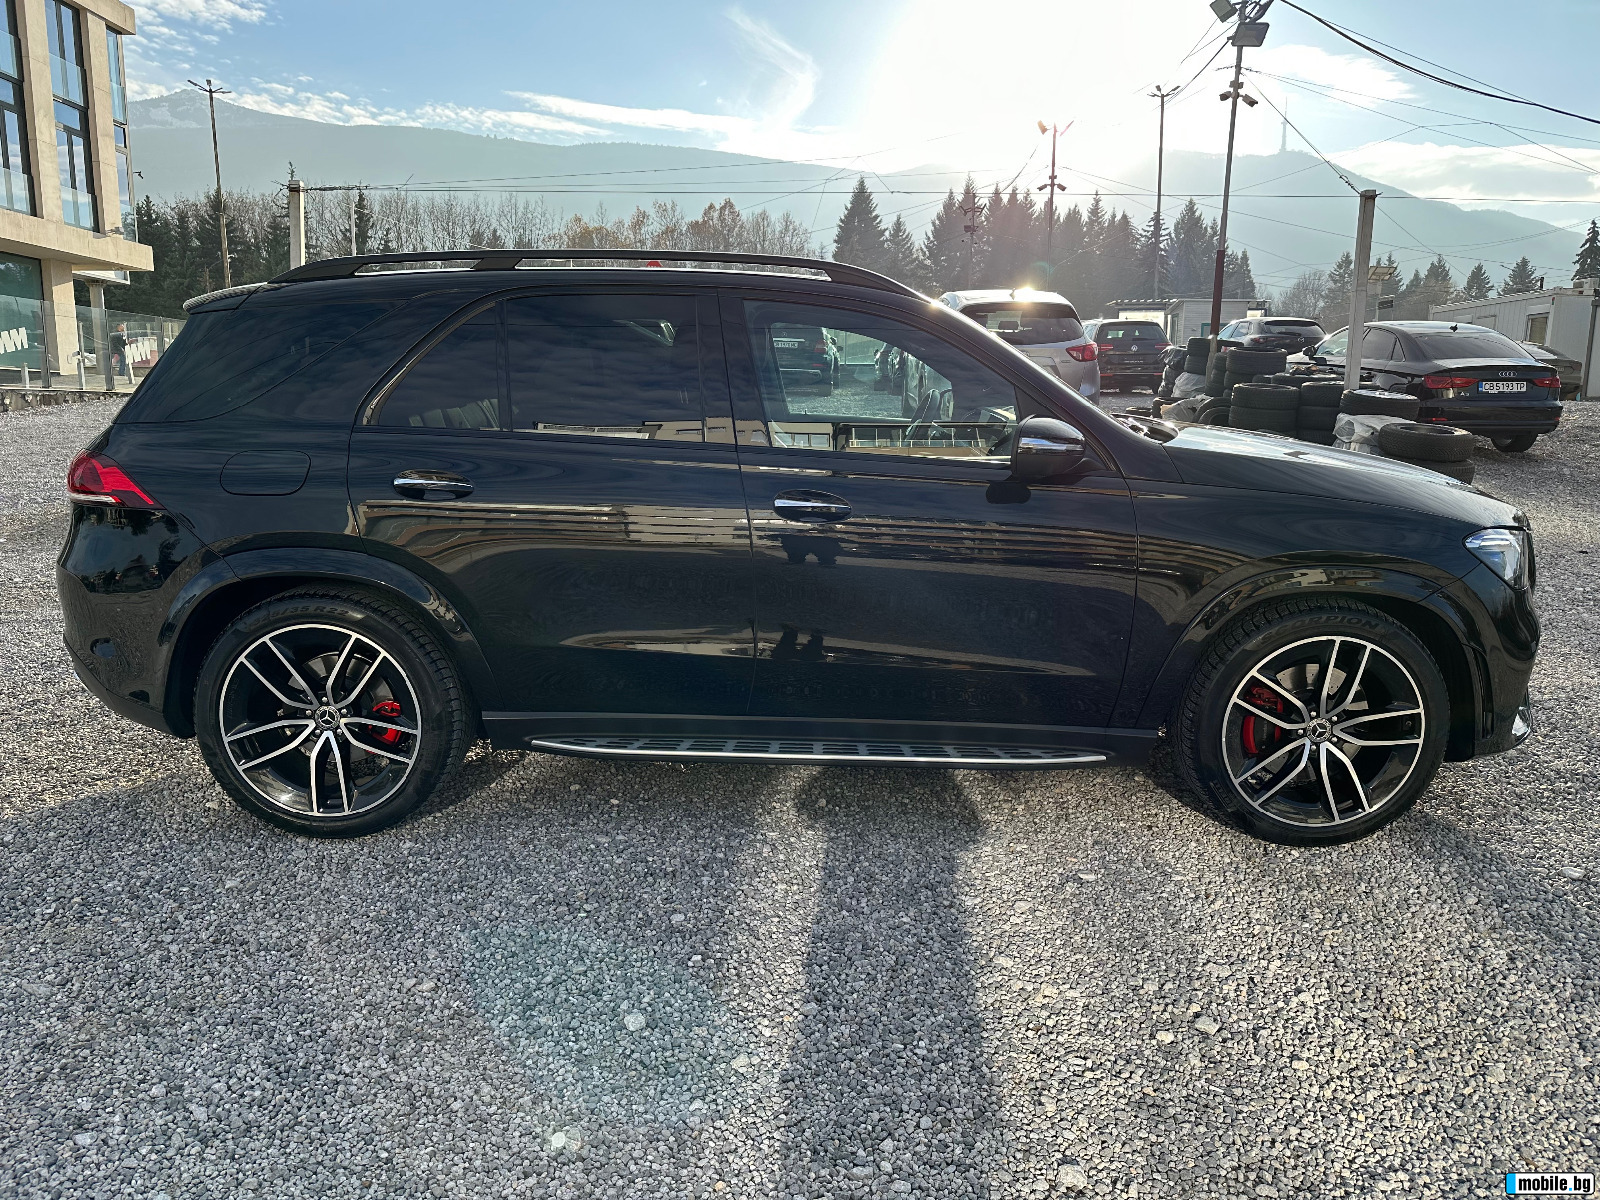 Mercedes-Benz GLE 400 D AMG ! Airmatic*Panorama | Mobile.bg   4